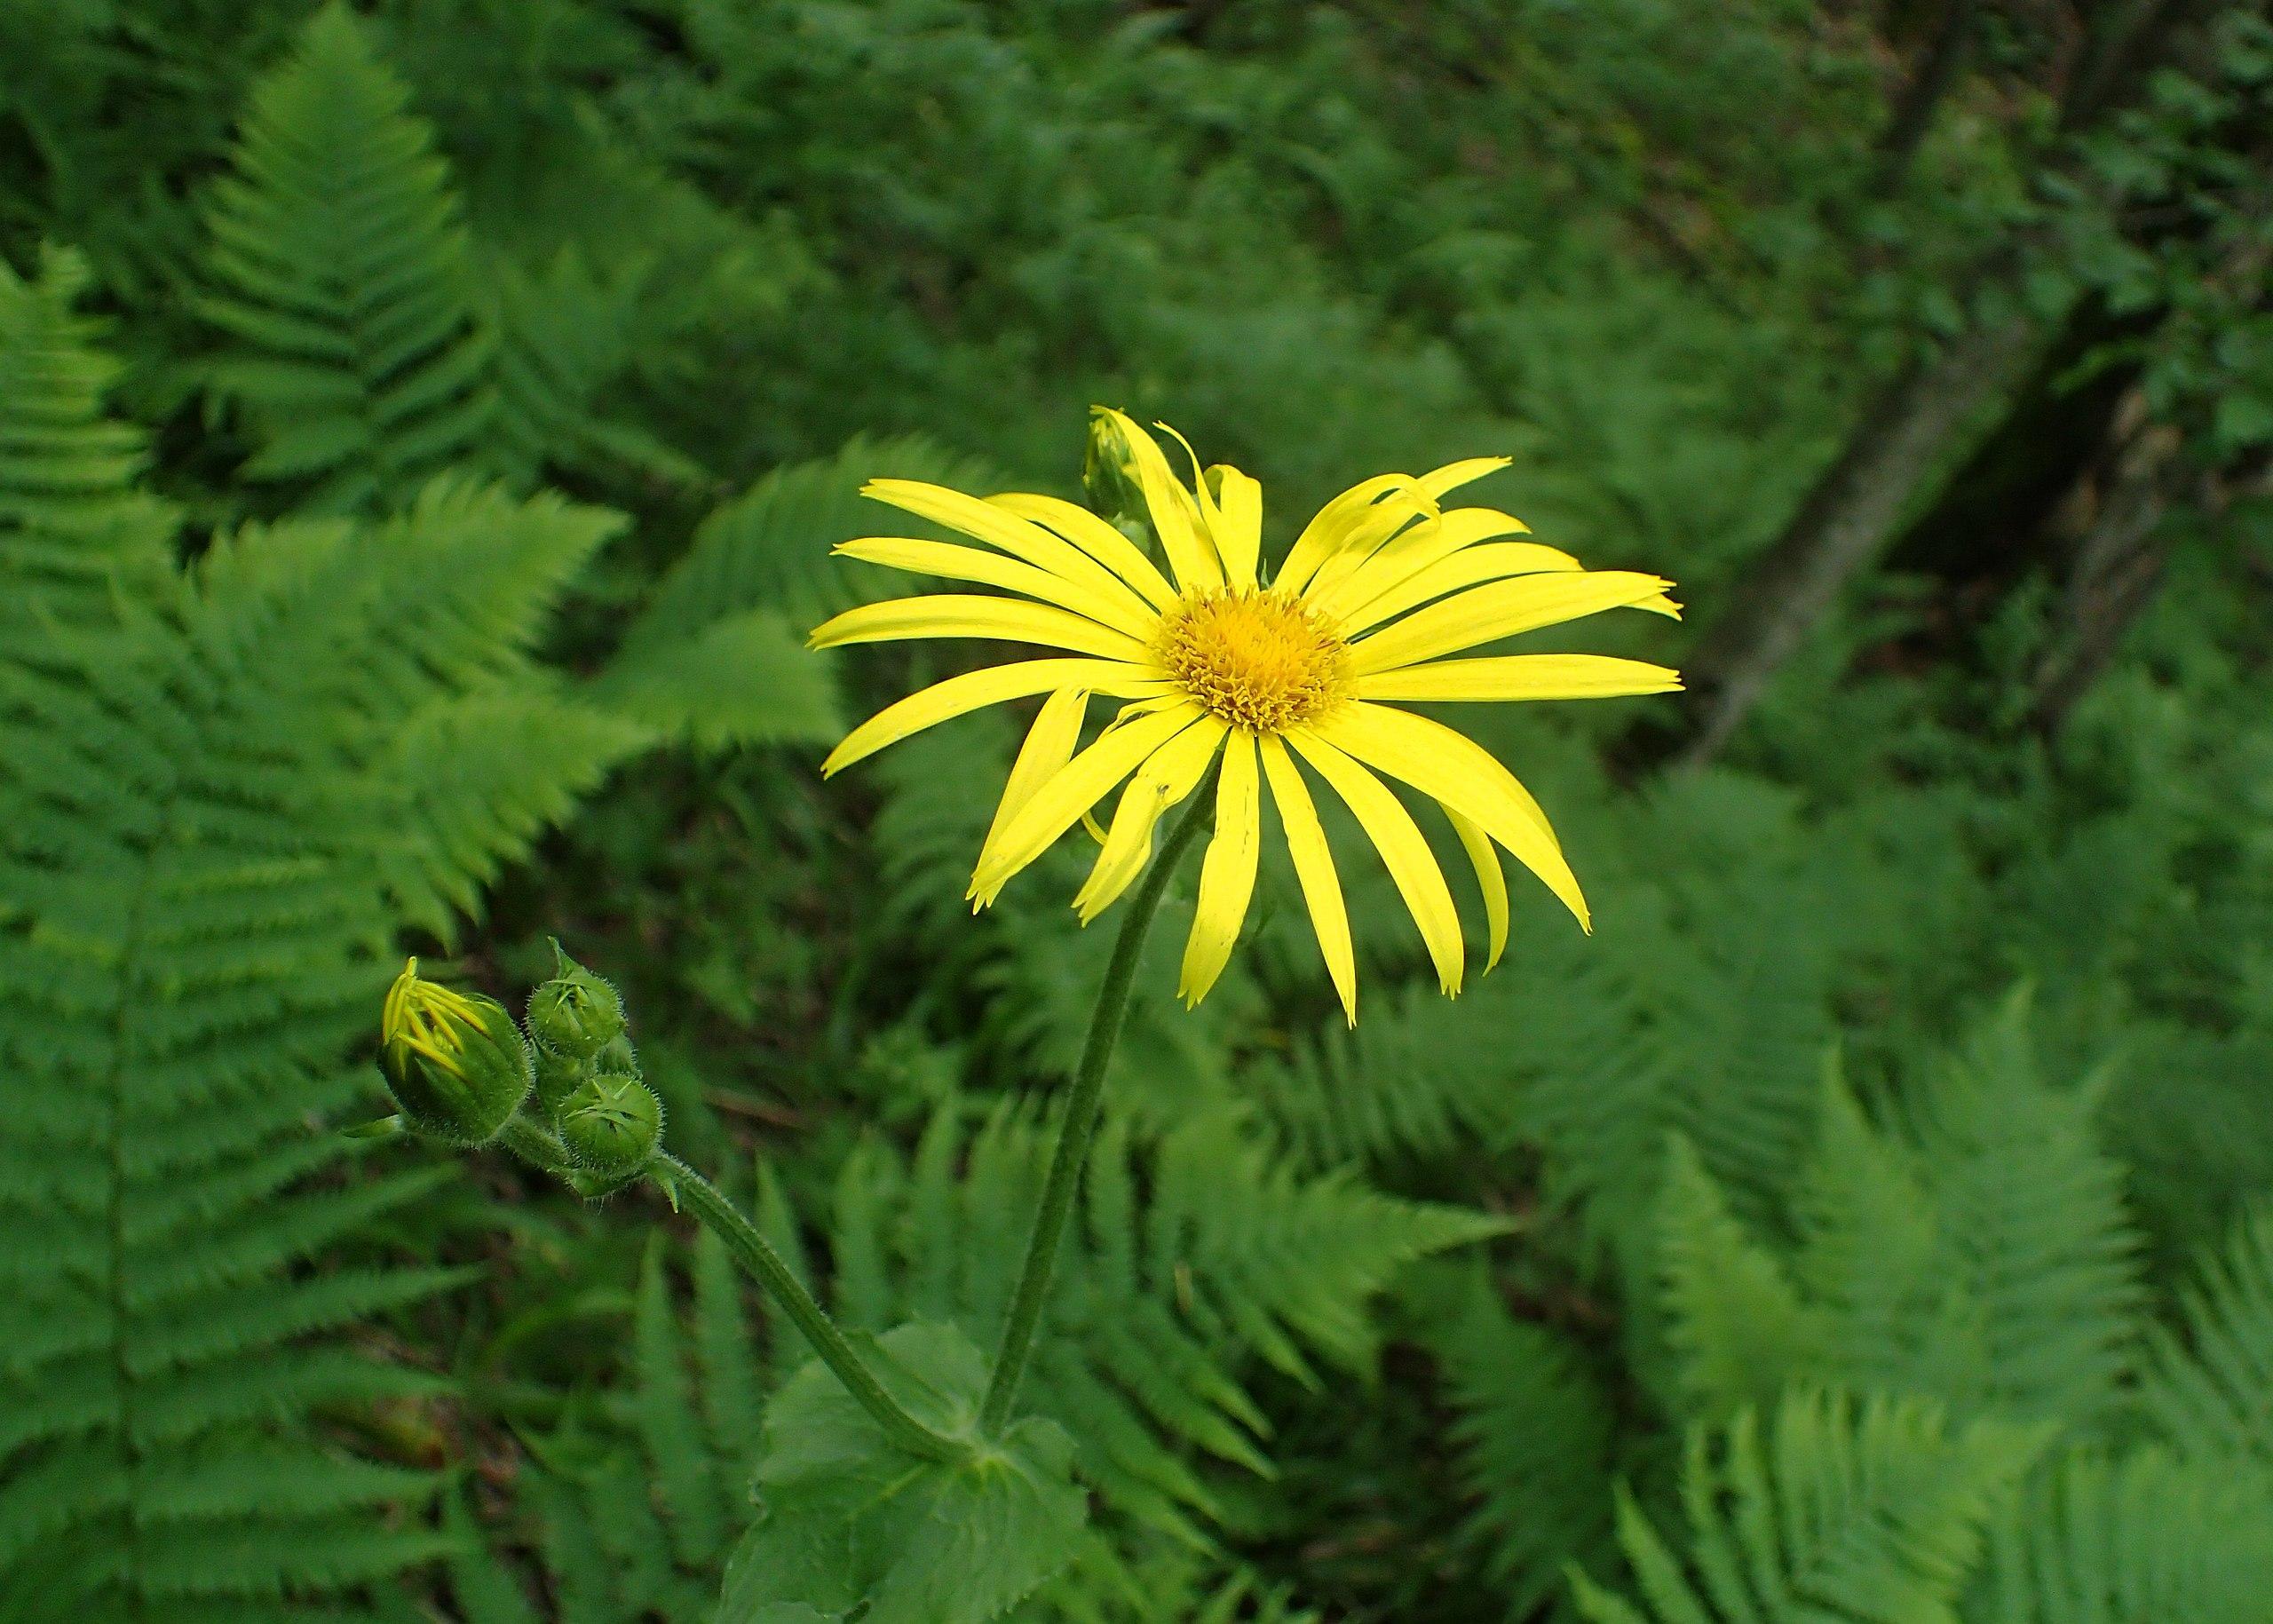 yellow flower with dark-yellow center, green stems, leaves and green-yellow buds